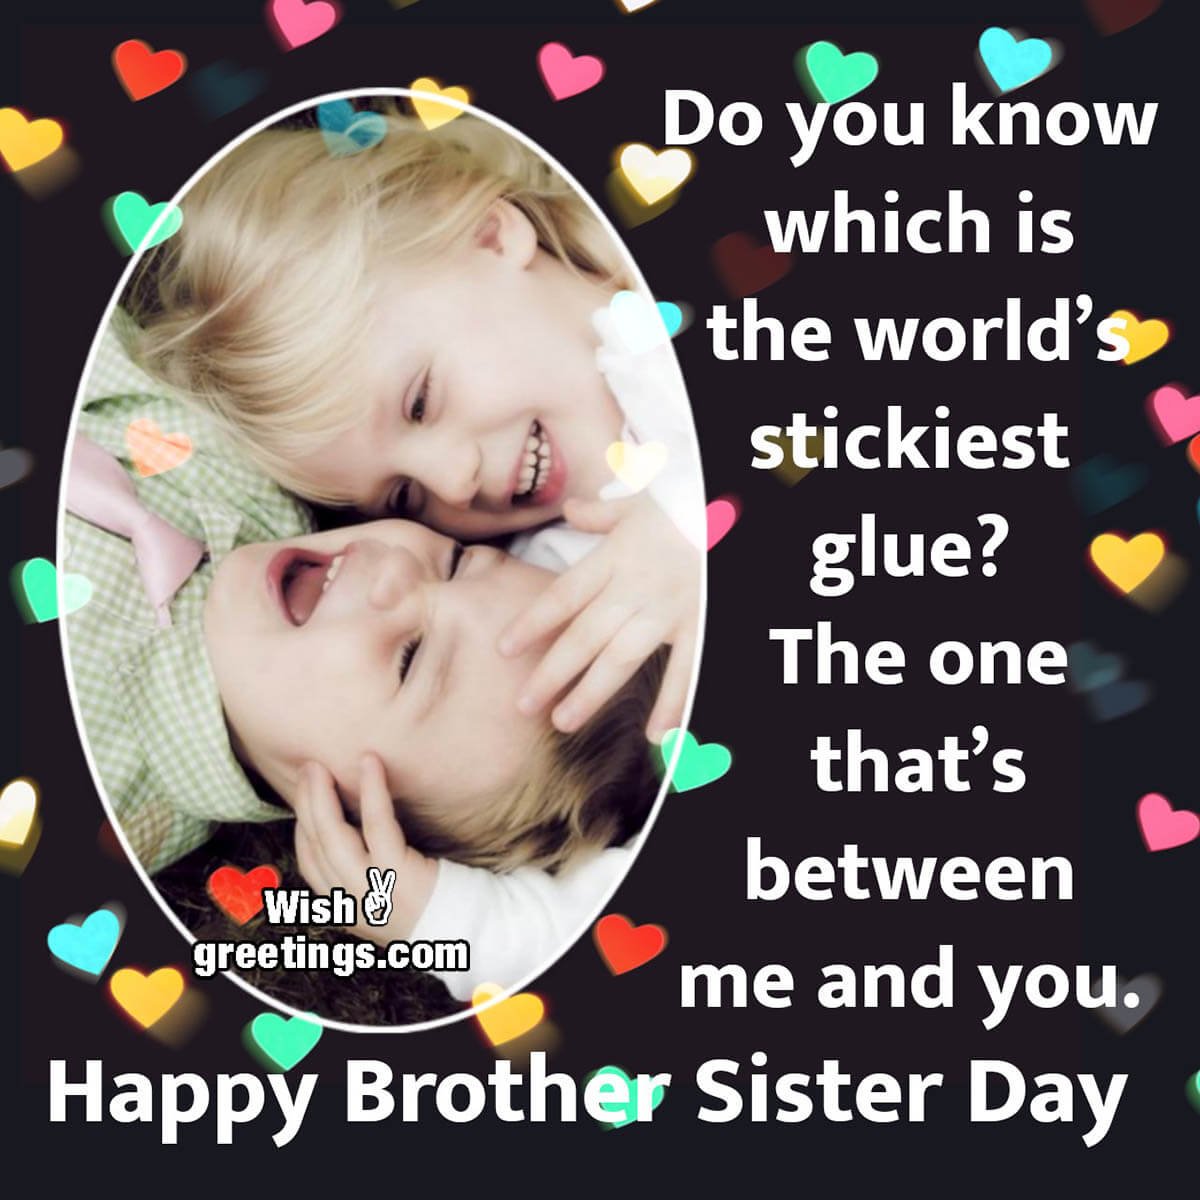 Happy Brother Sister Day Message